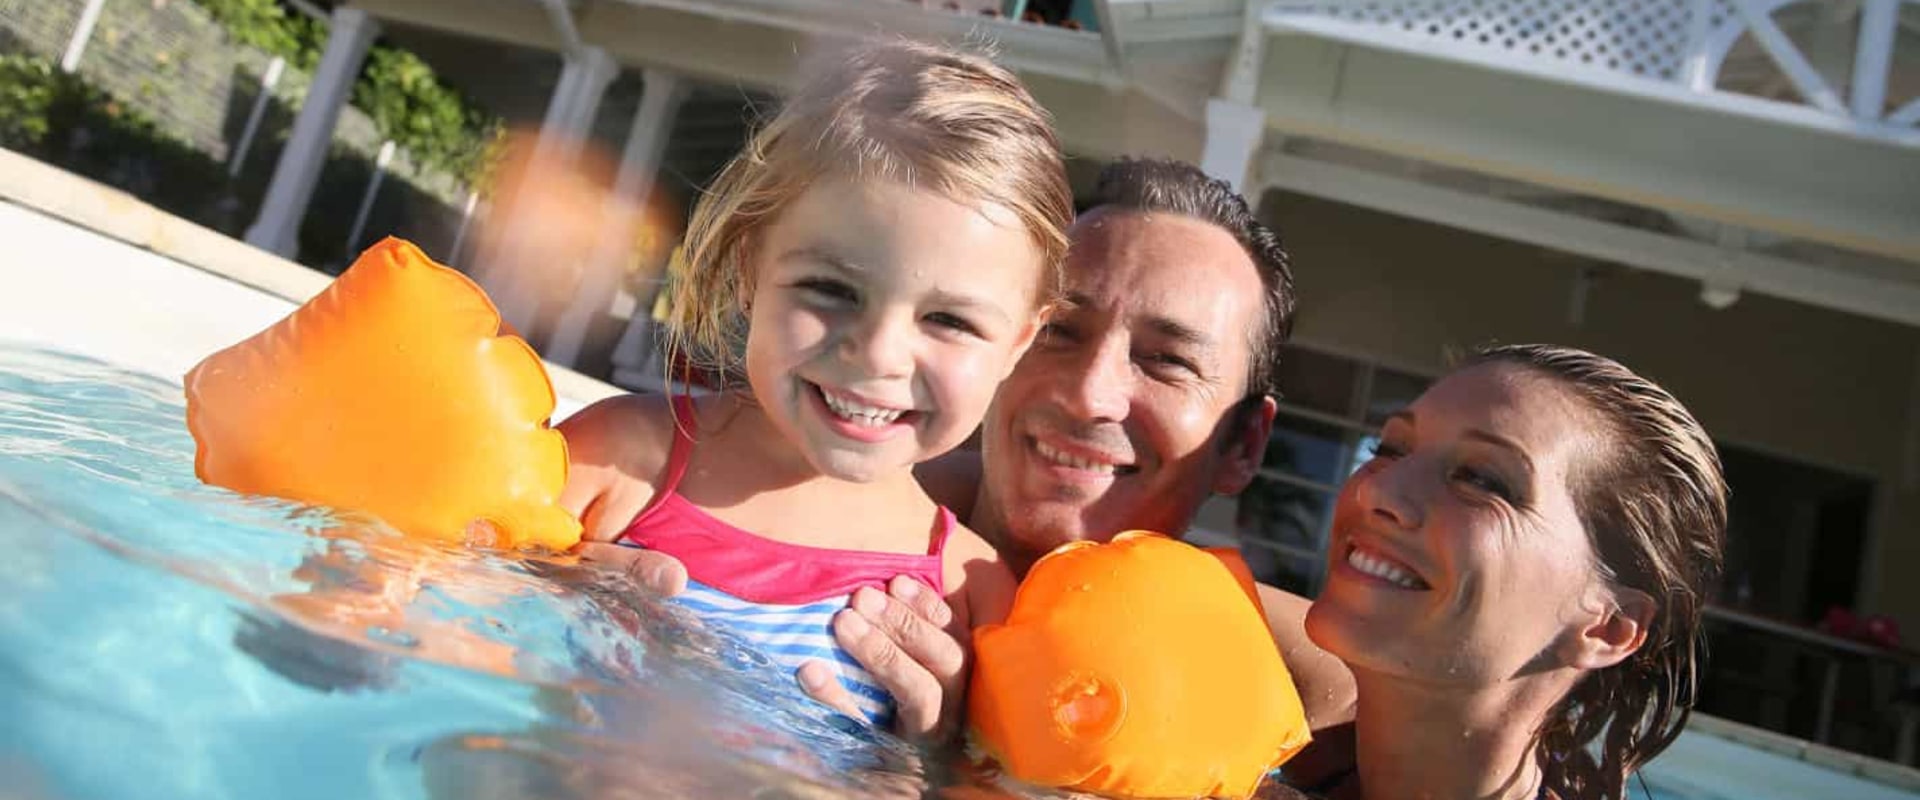 Family-Friendly Resorts in Tampa, Florida: Enjoy the Sun and Comfort in Style